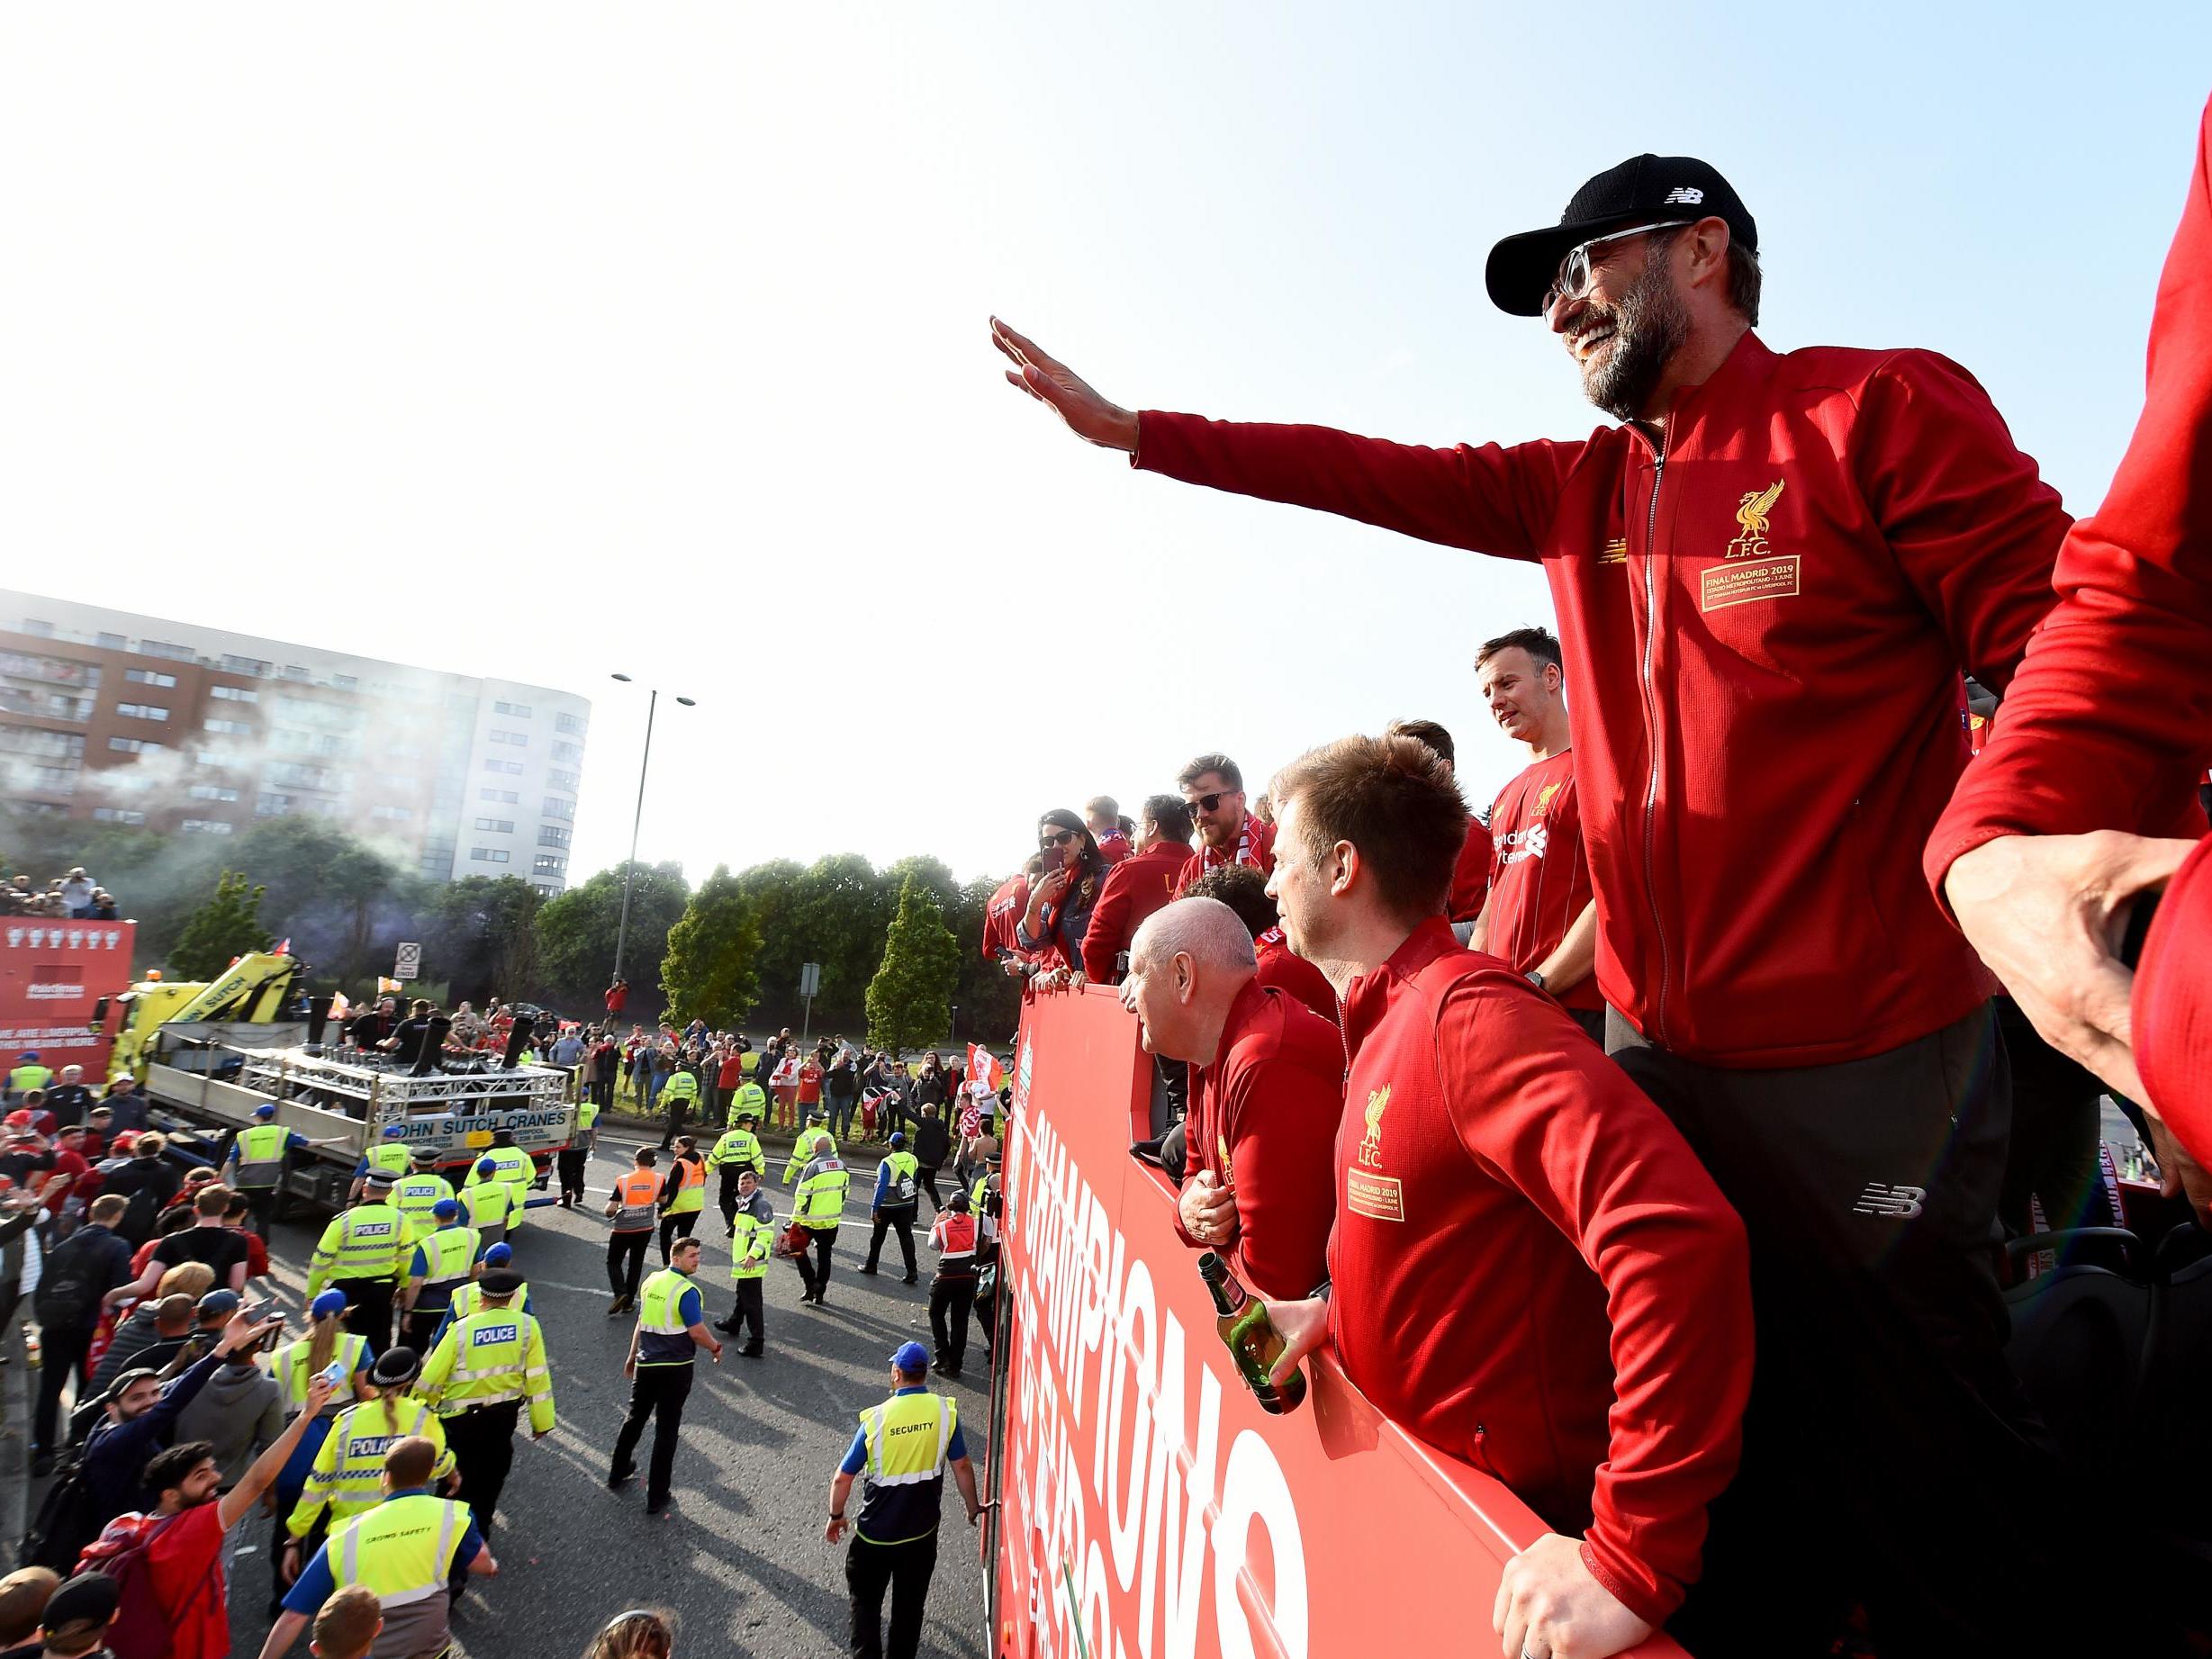 Klopp has helped unite Liverpool and reconstitute its fractured state